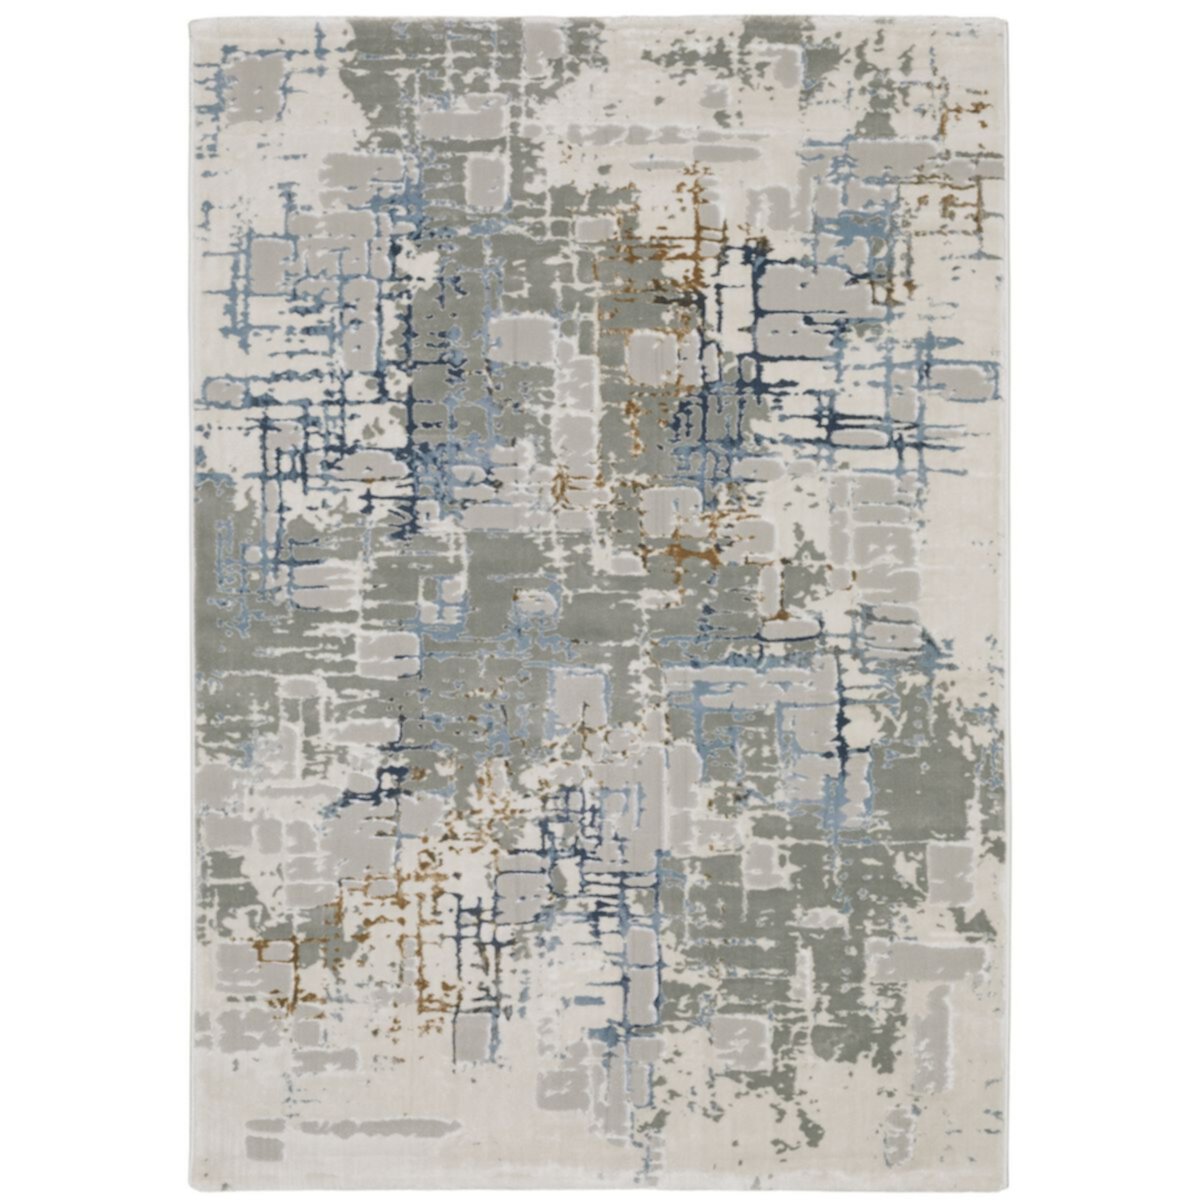 StyleHaven Emery Industrial Abstract Area Rug StyleHaven